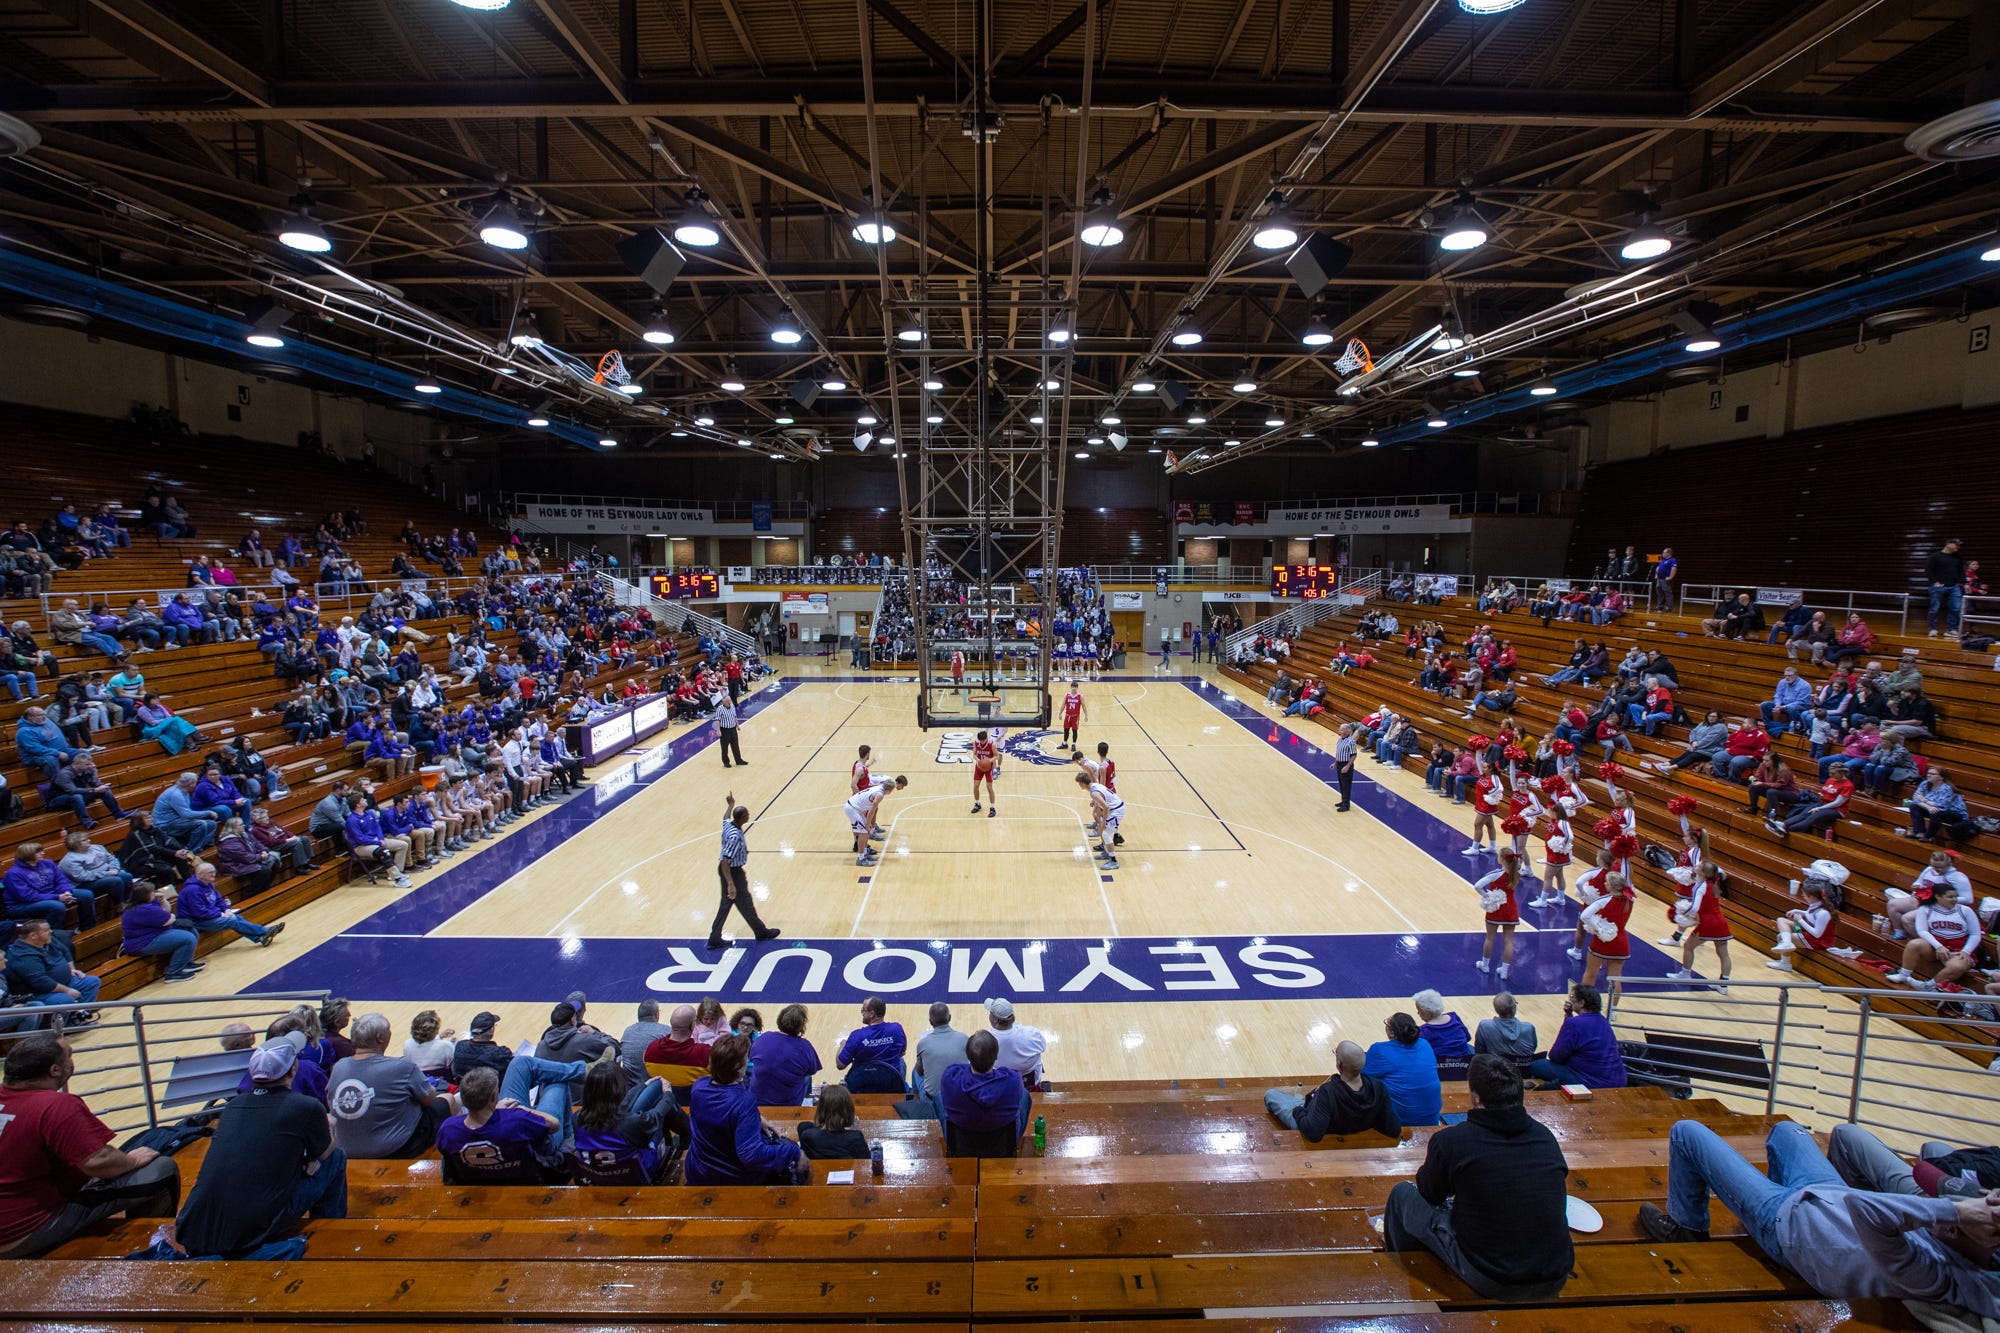 Big Indiana Gyms: Tour 13 of the largest high school gyms in the U.S.